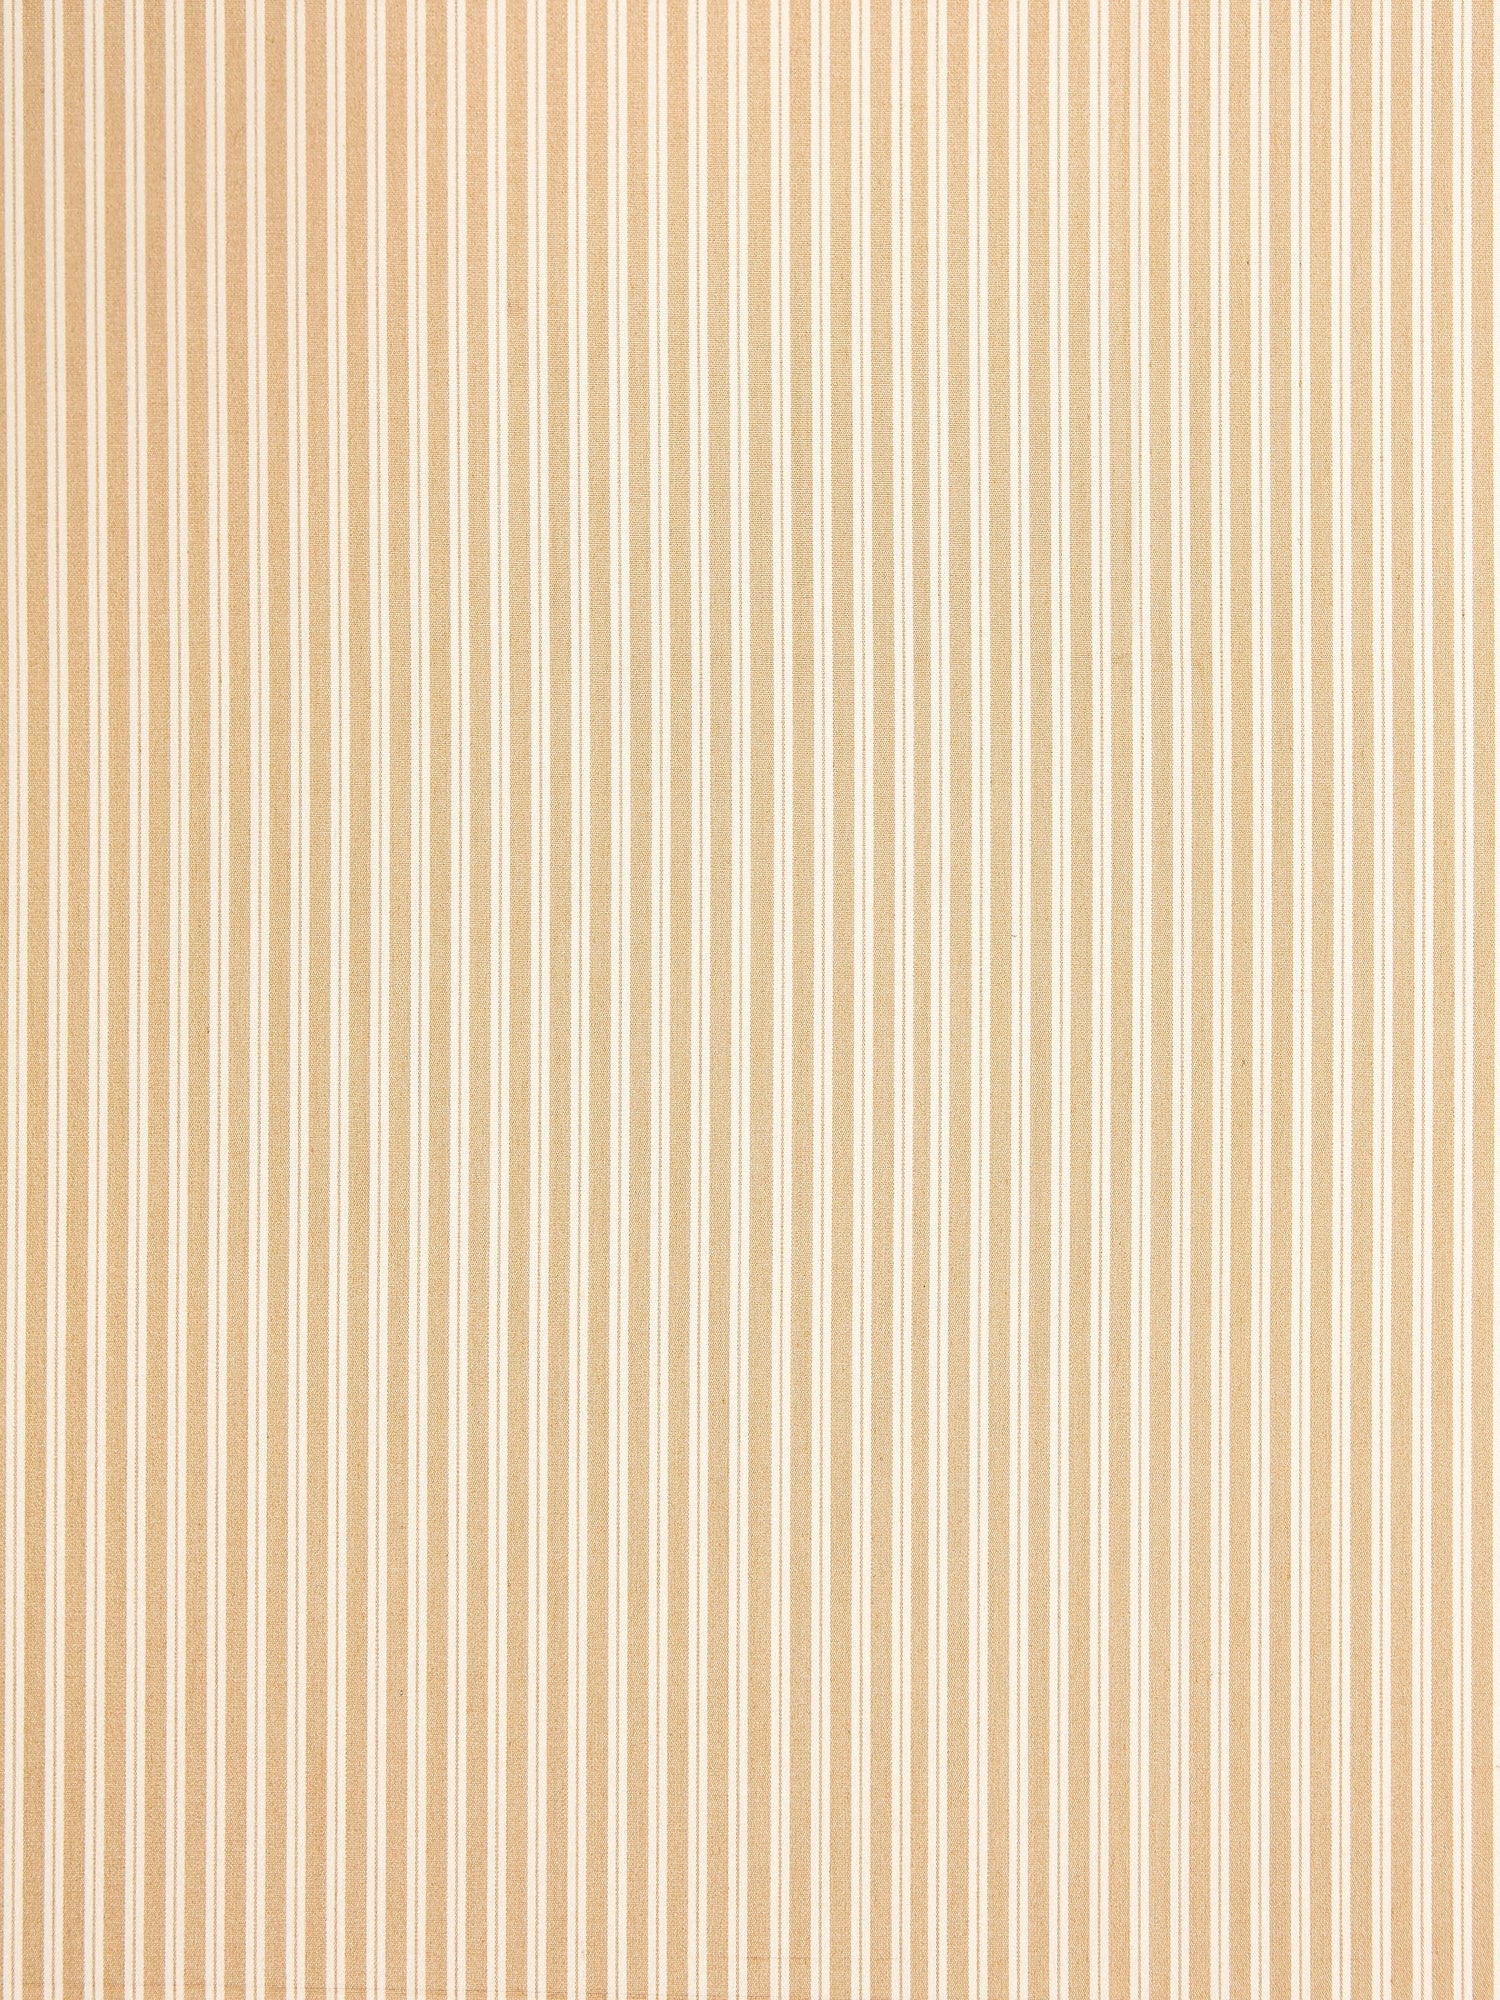 Kent Stripe fabric in biscuit color - pattern number SC 000136395 - by Scalamandre in the Scalamandre Fabrics Book 1 collection